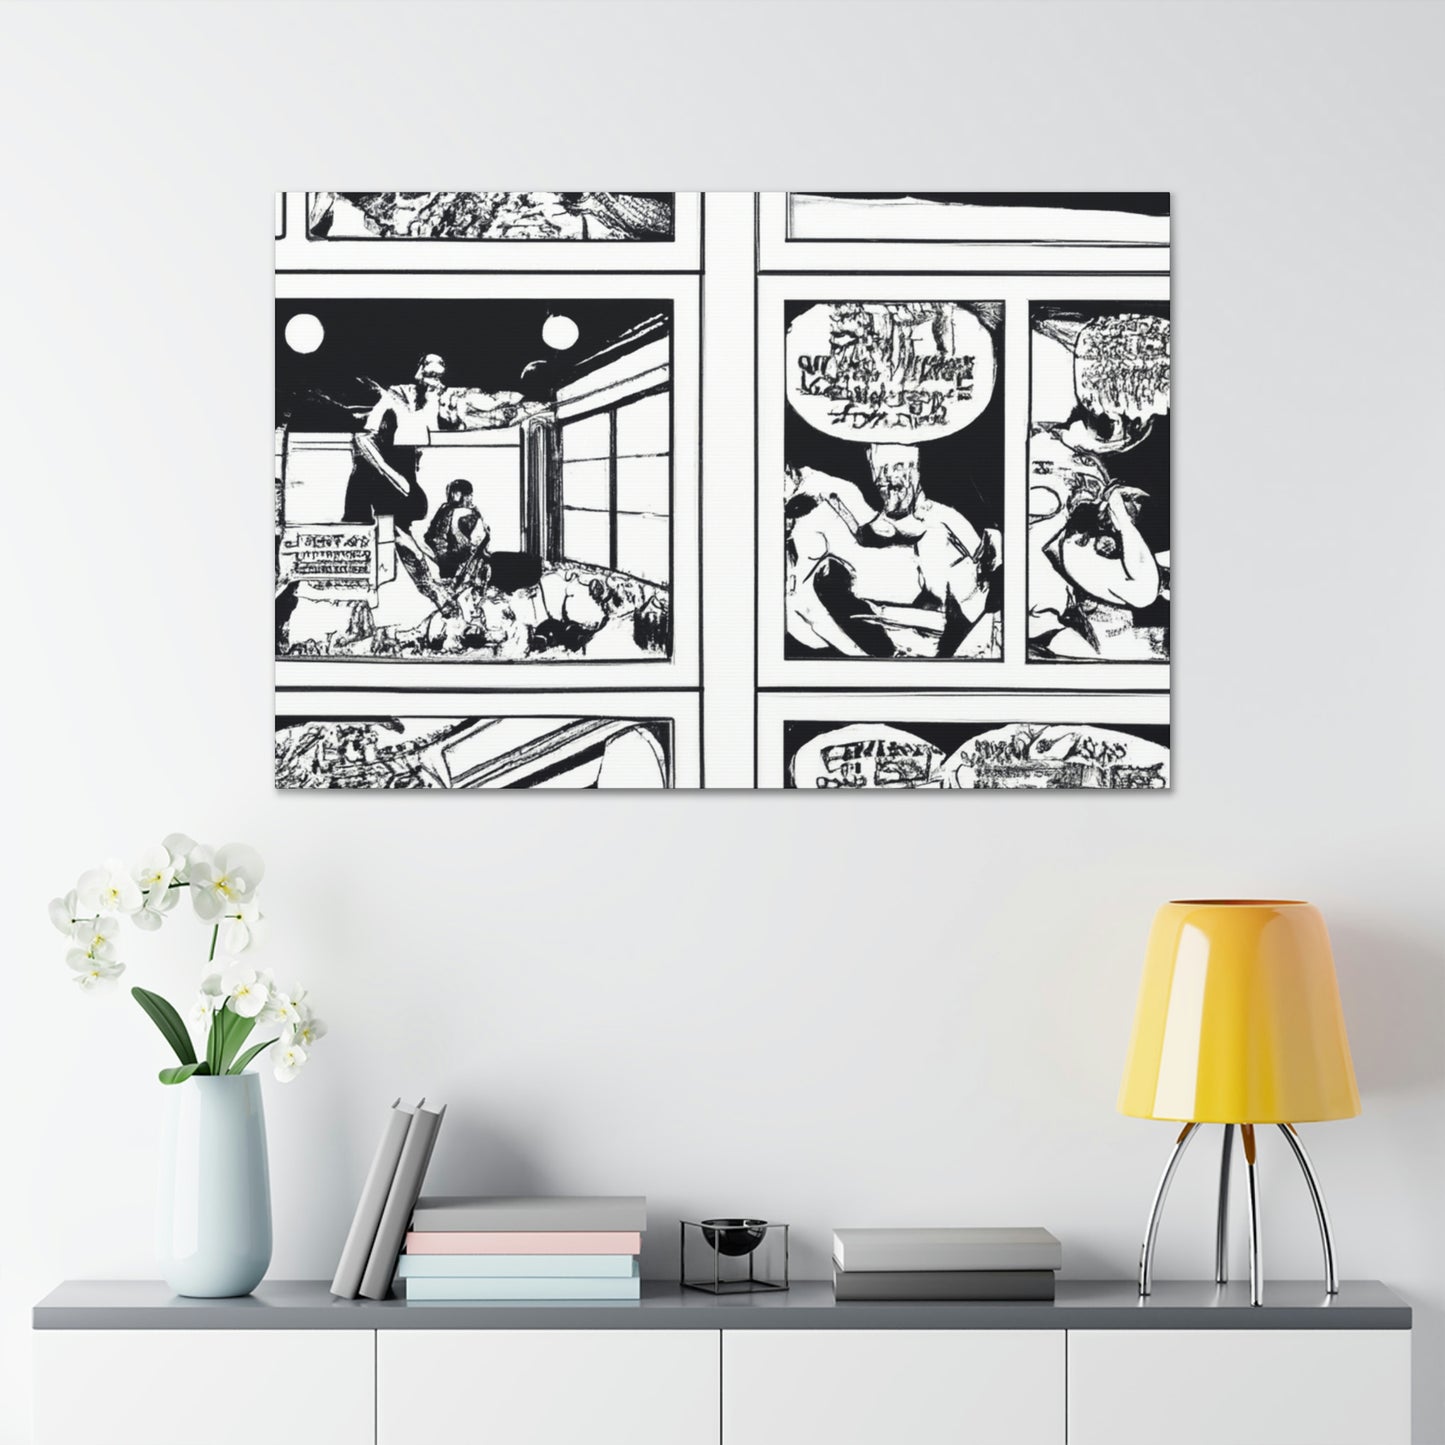 Captain Cinder - Comics Collector Canvas Wall Art For Bedroom Office Living Room